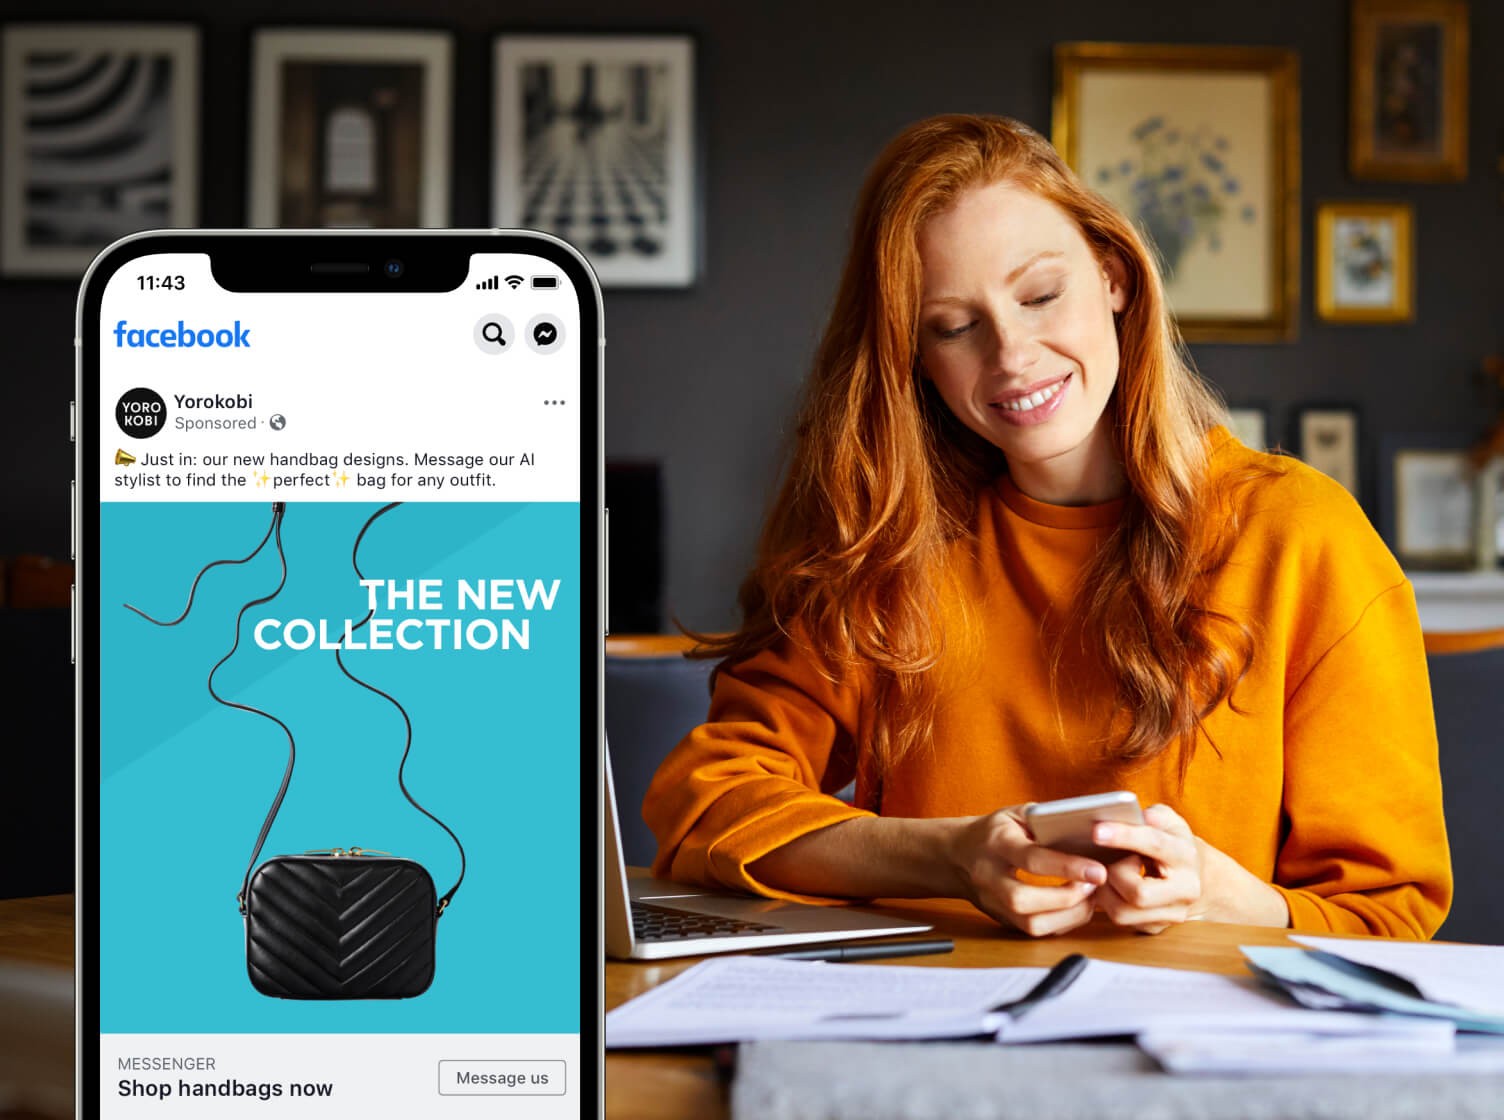 conversational commerce platform enables woman to purchase on her phone